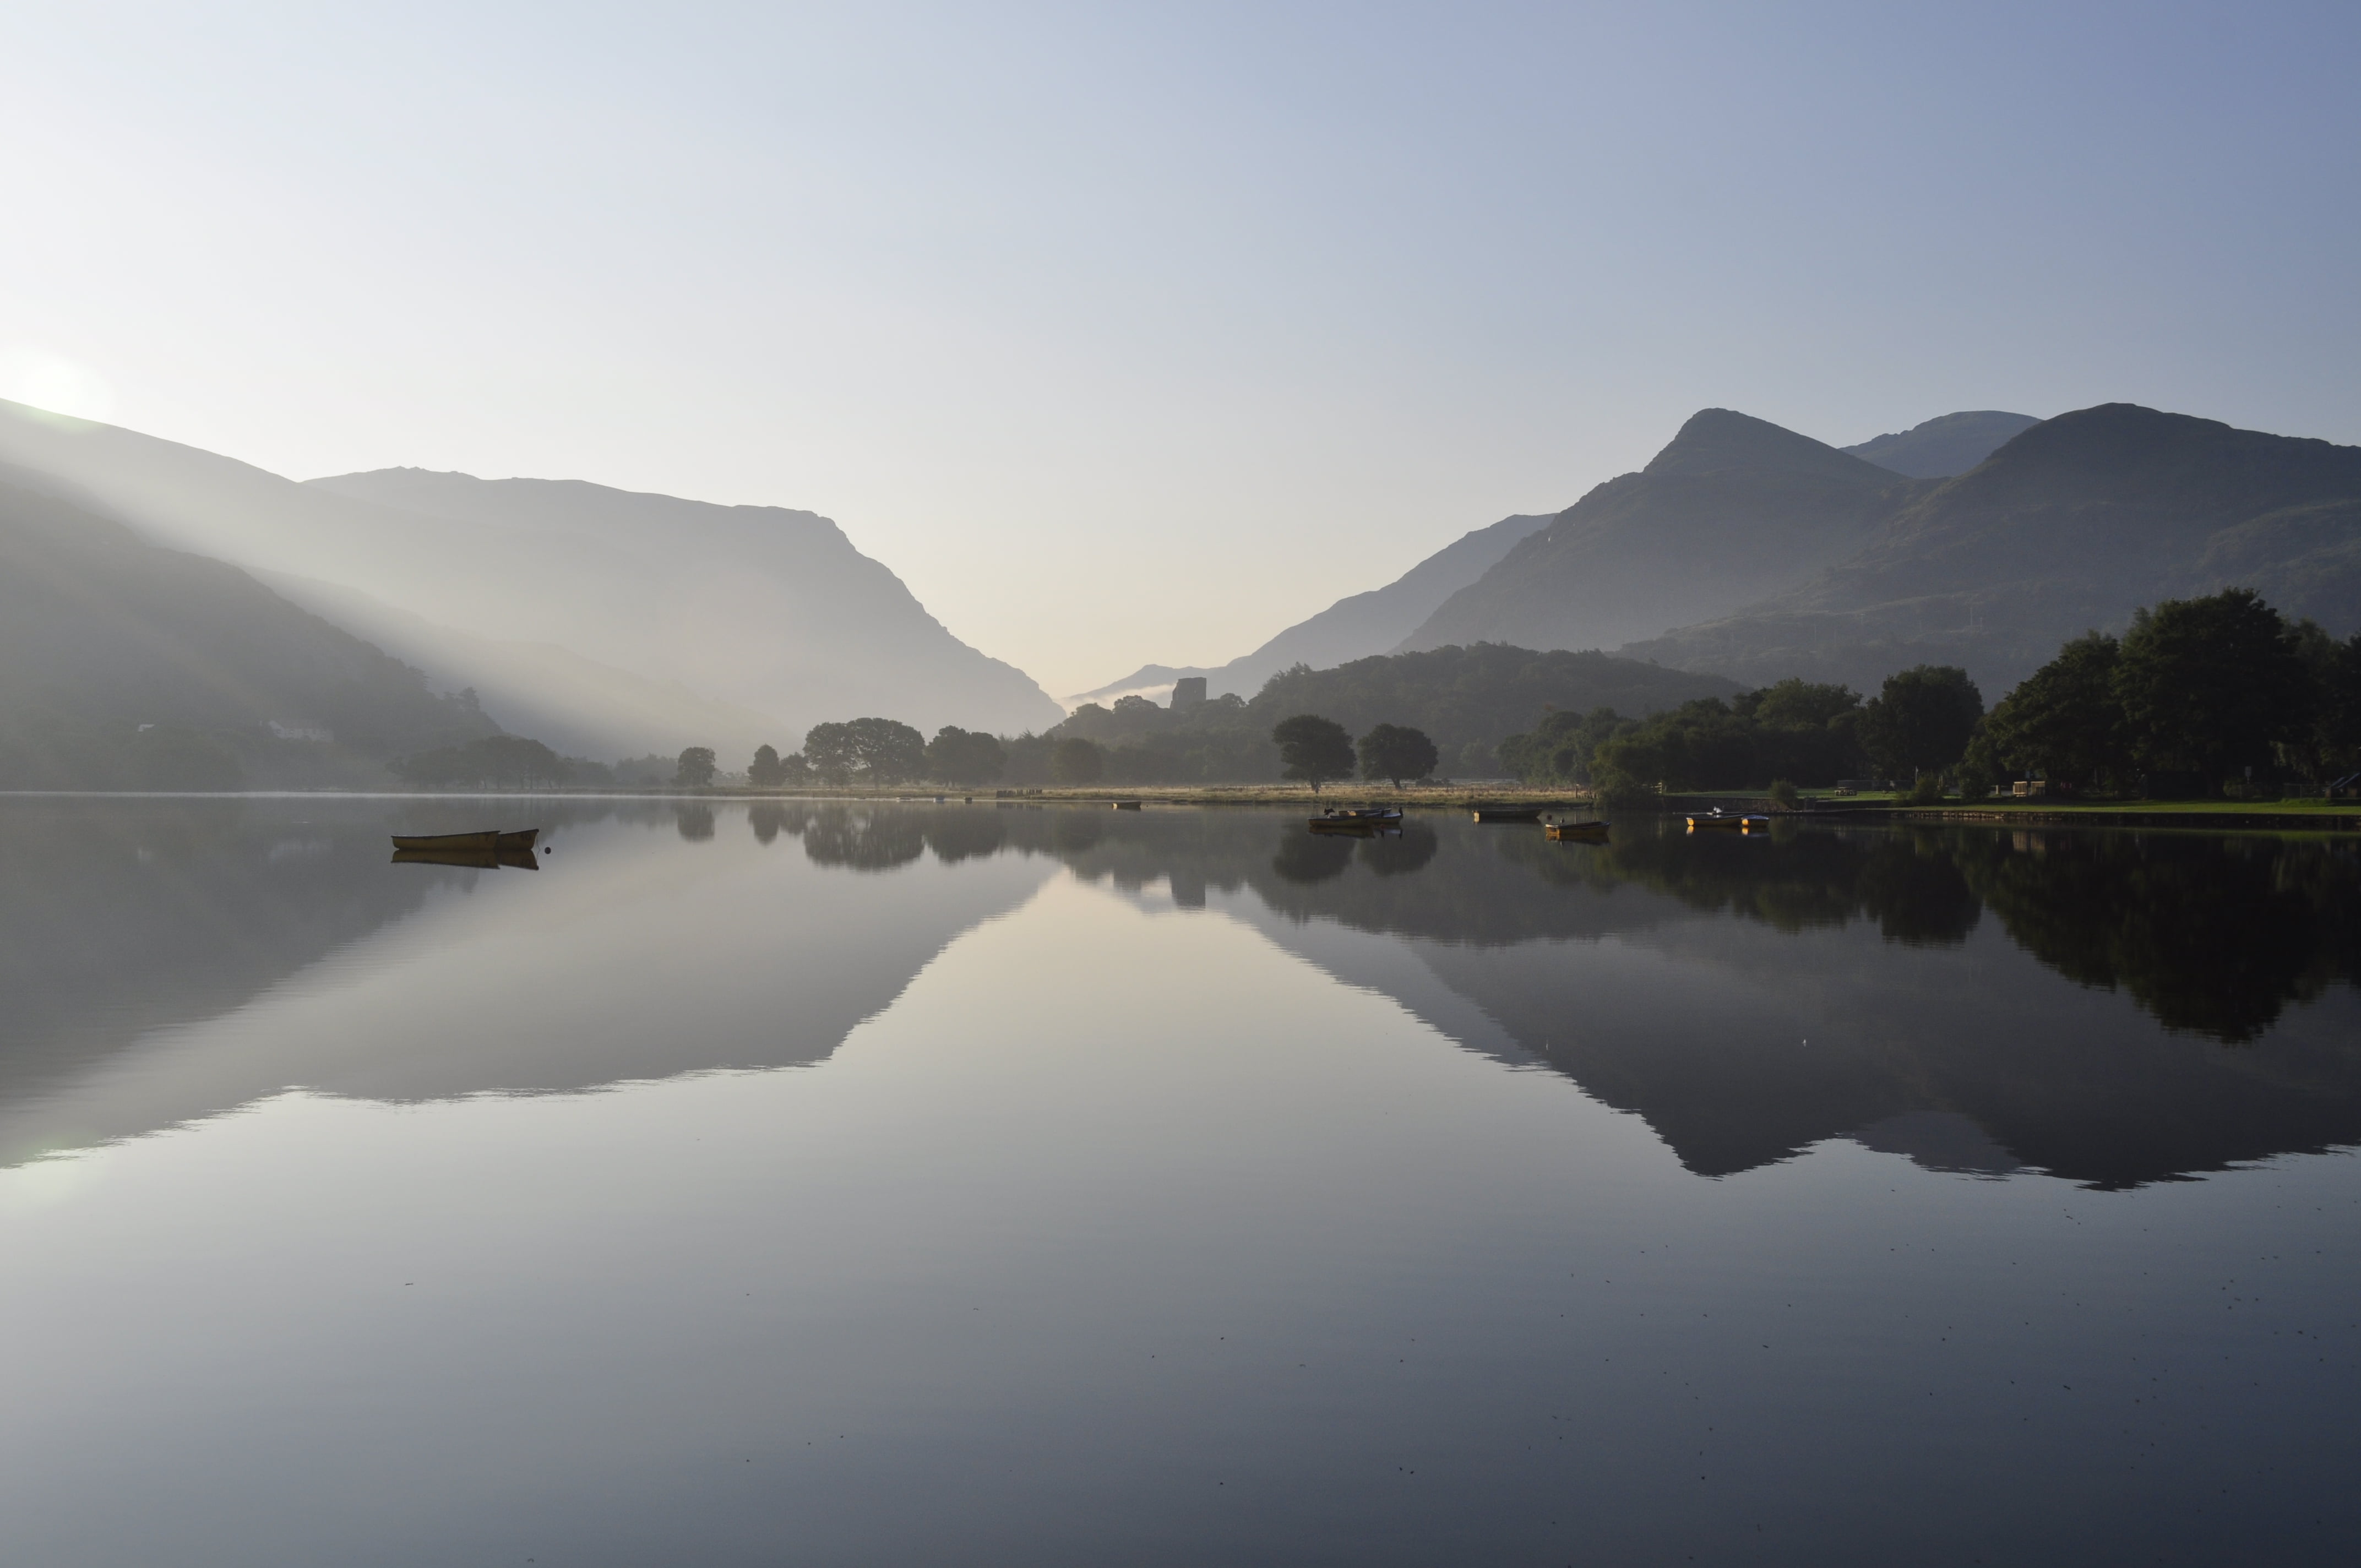 calm body of lake surrounded with mountains under blue sky at daytime, llanberis, llanberis